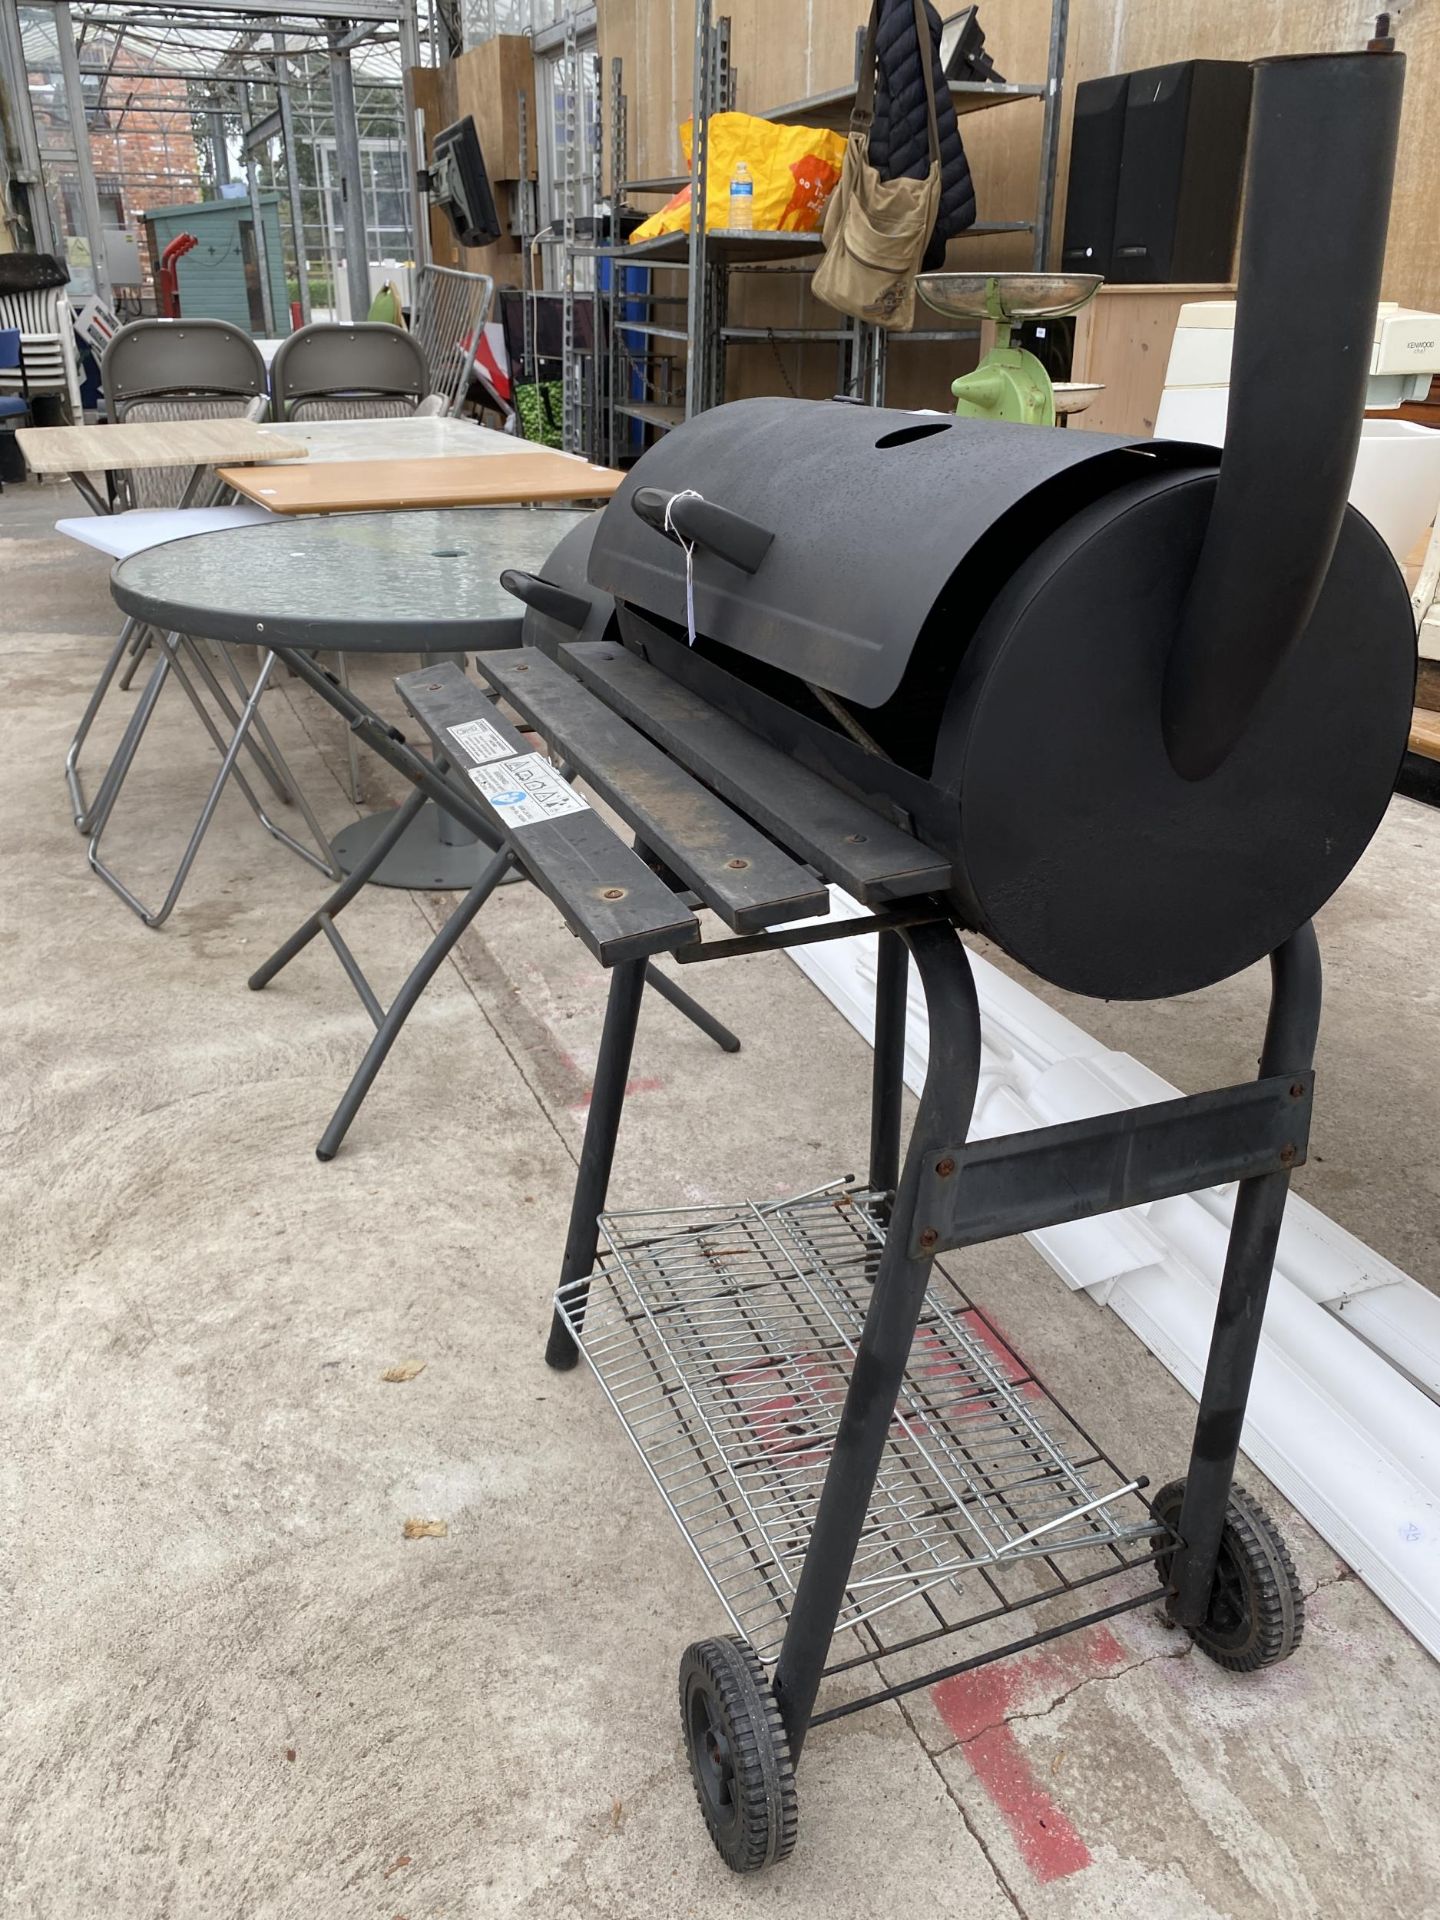 A CHARCOAL BBQ AND A GLASS TOPPED PATIO TABLE - Bild 2 aus 4